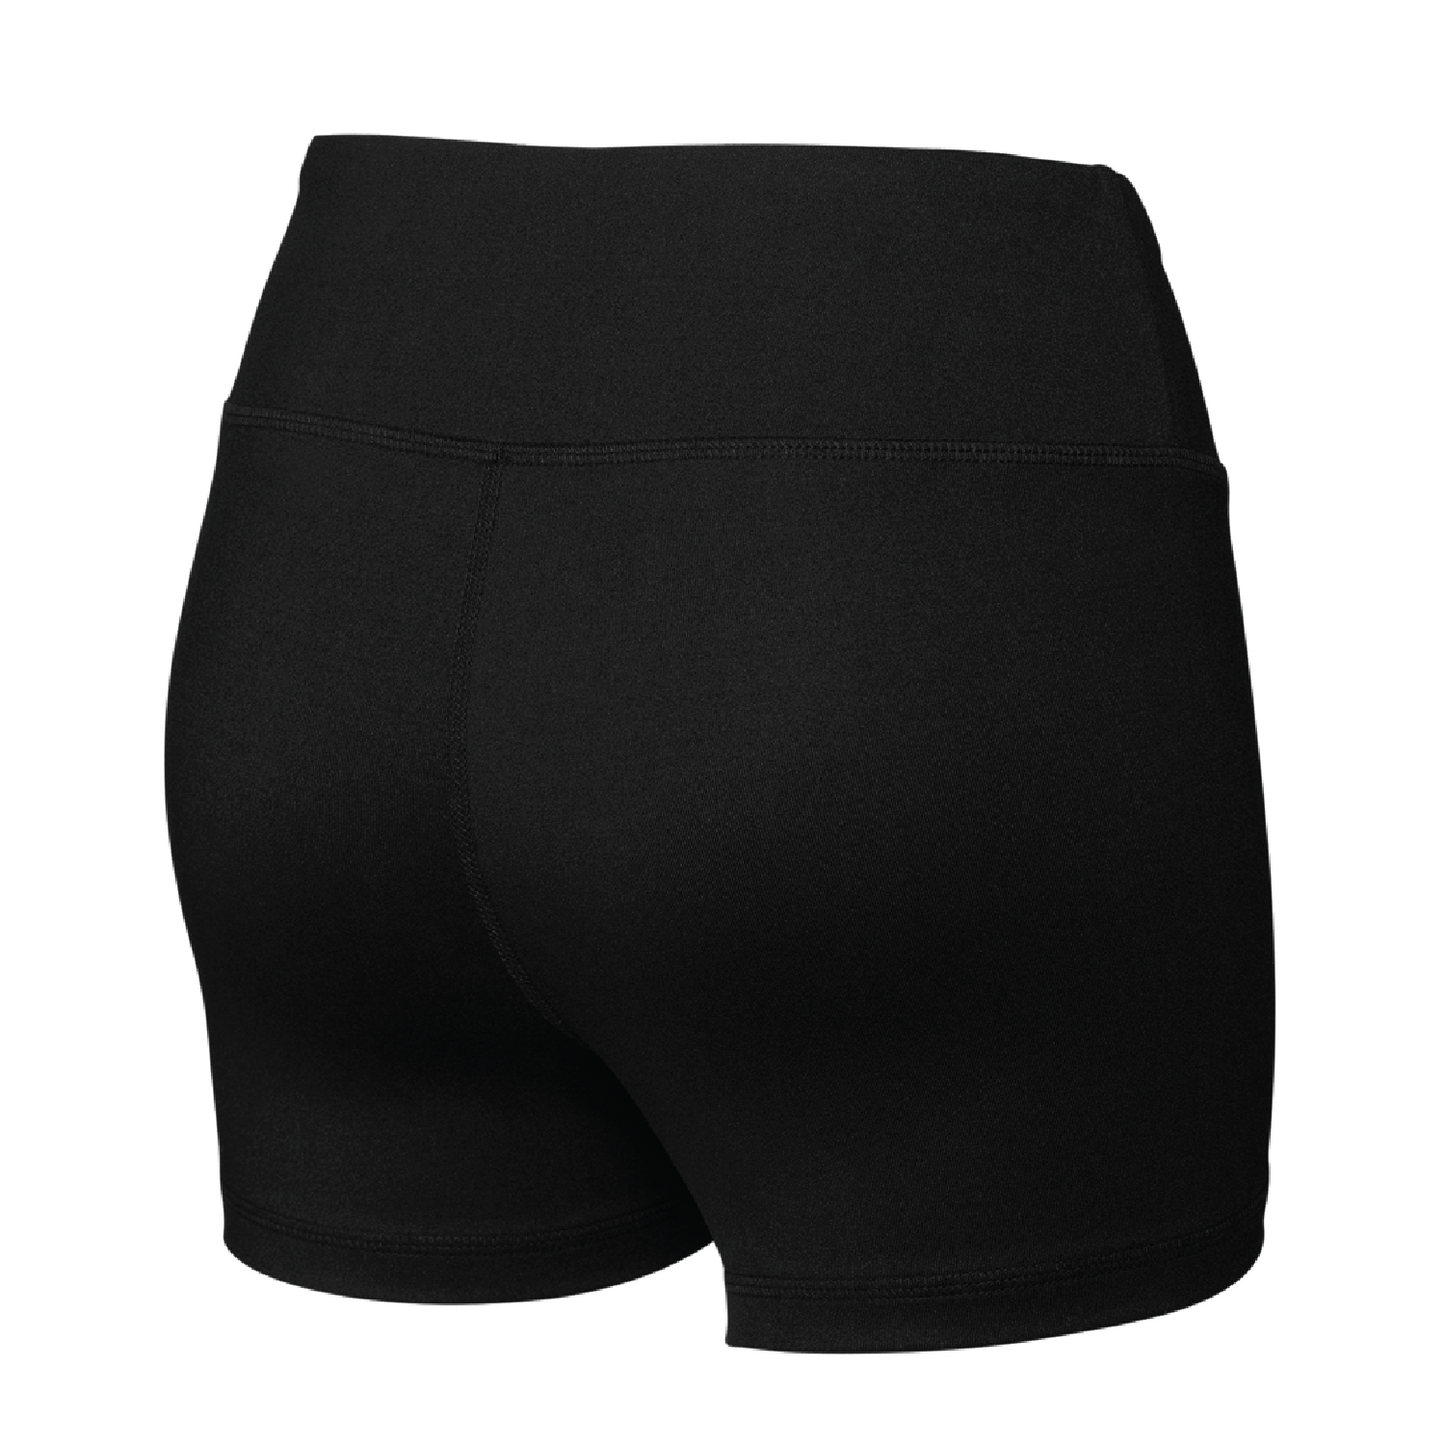 Rams Fastpitch Womens's Spandex Shorts